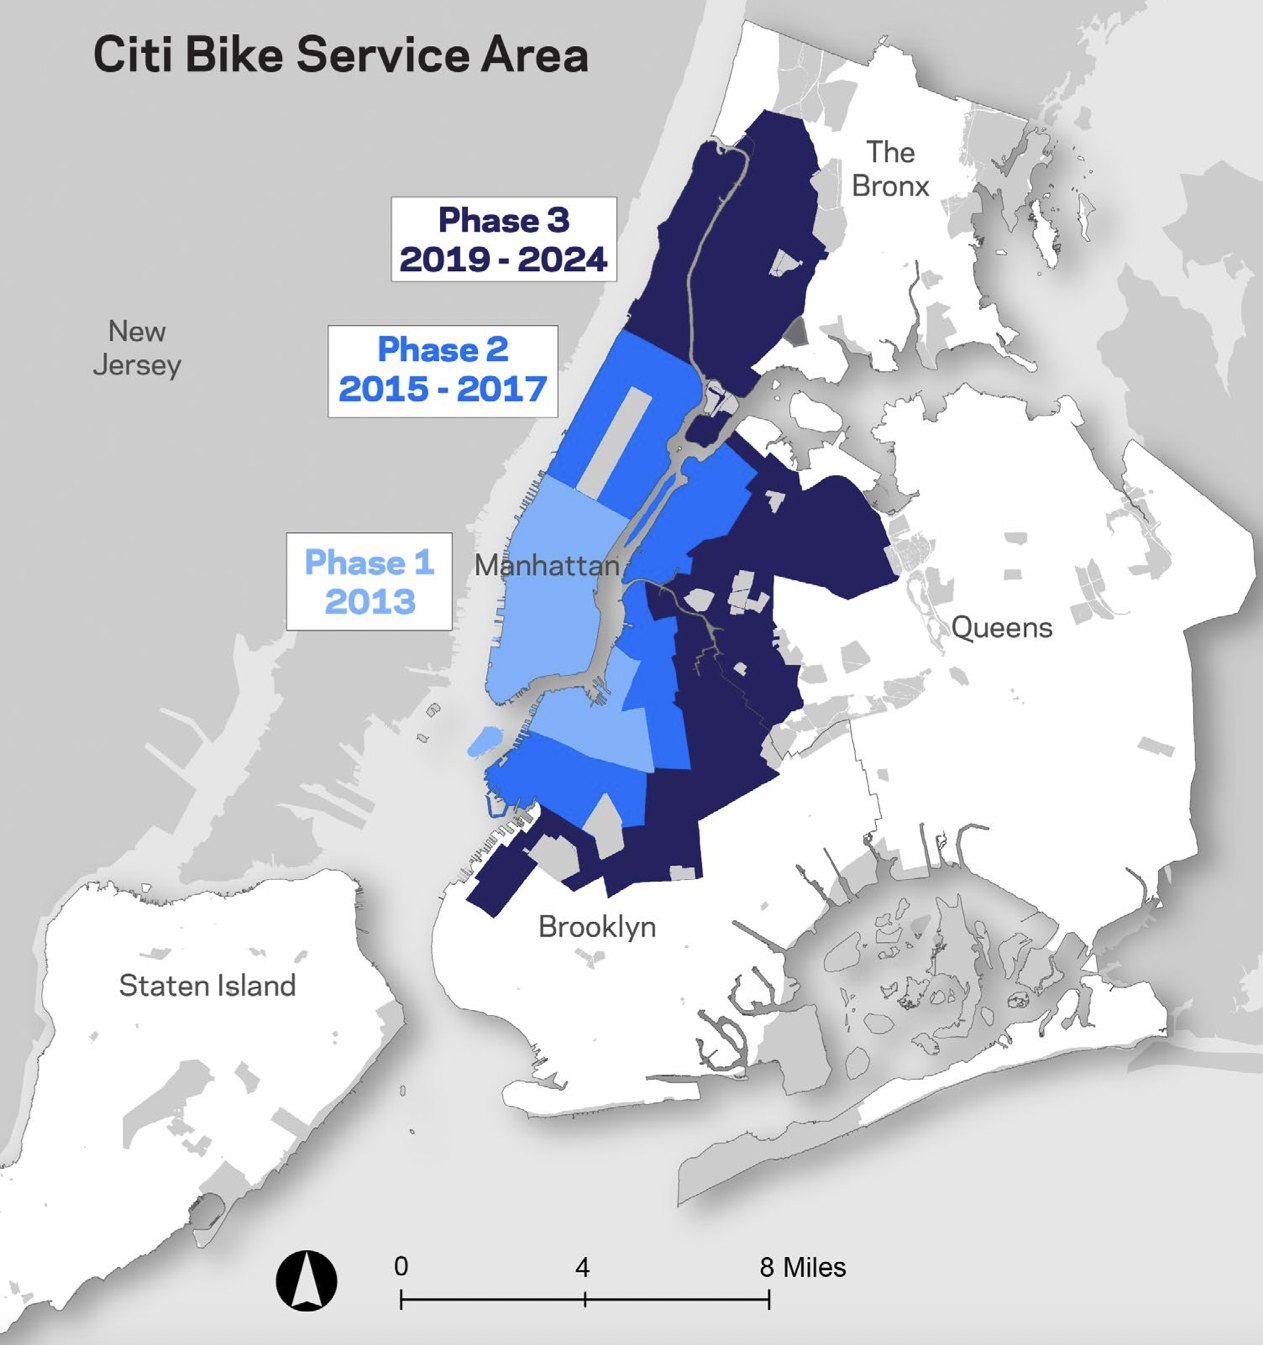 Citi Bike is expanding, but it still only covers a tiny portion of the city. Areas in white do not have the benefit of bike share.